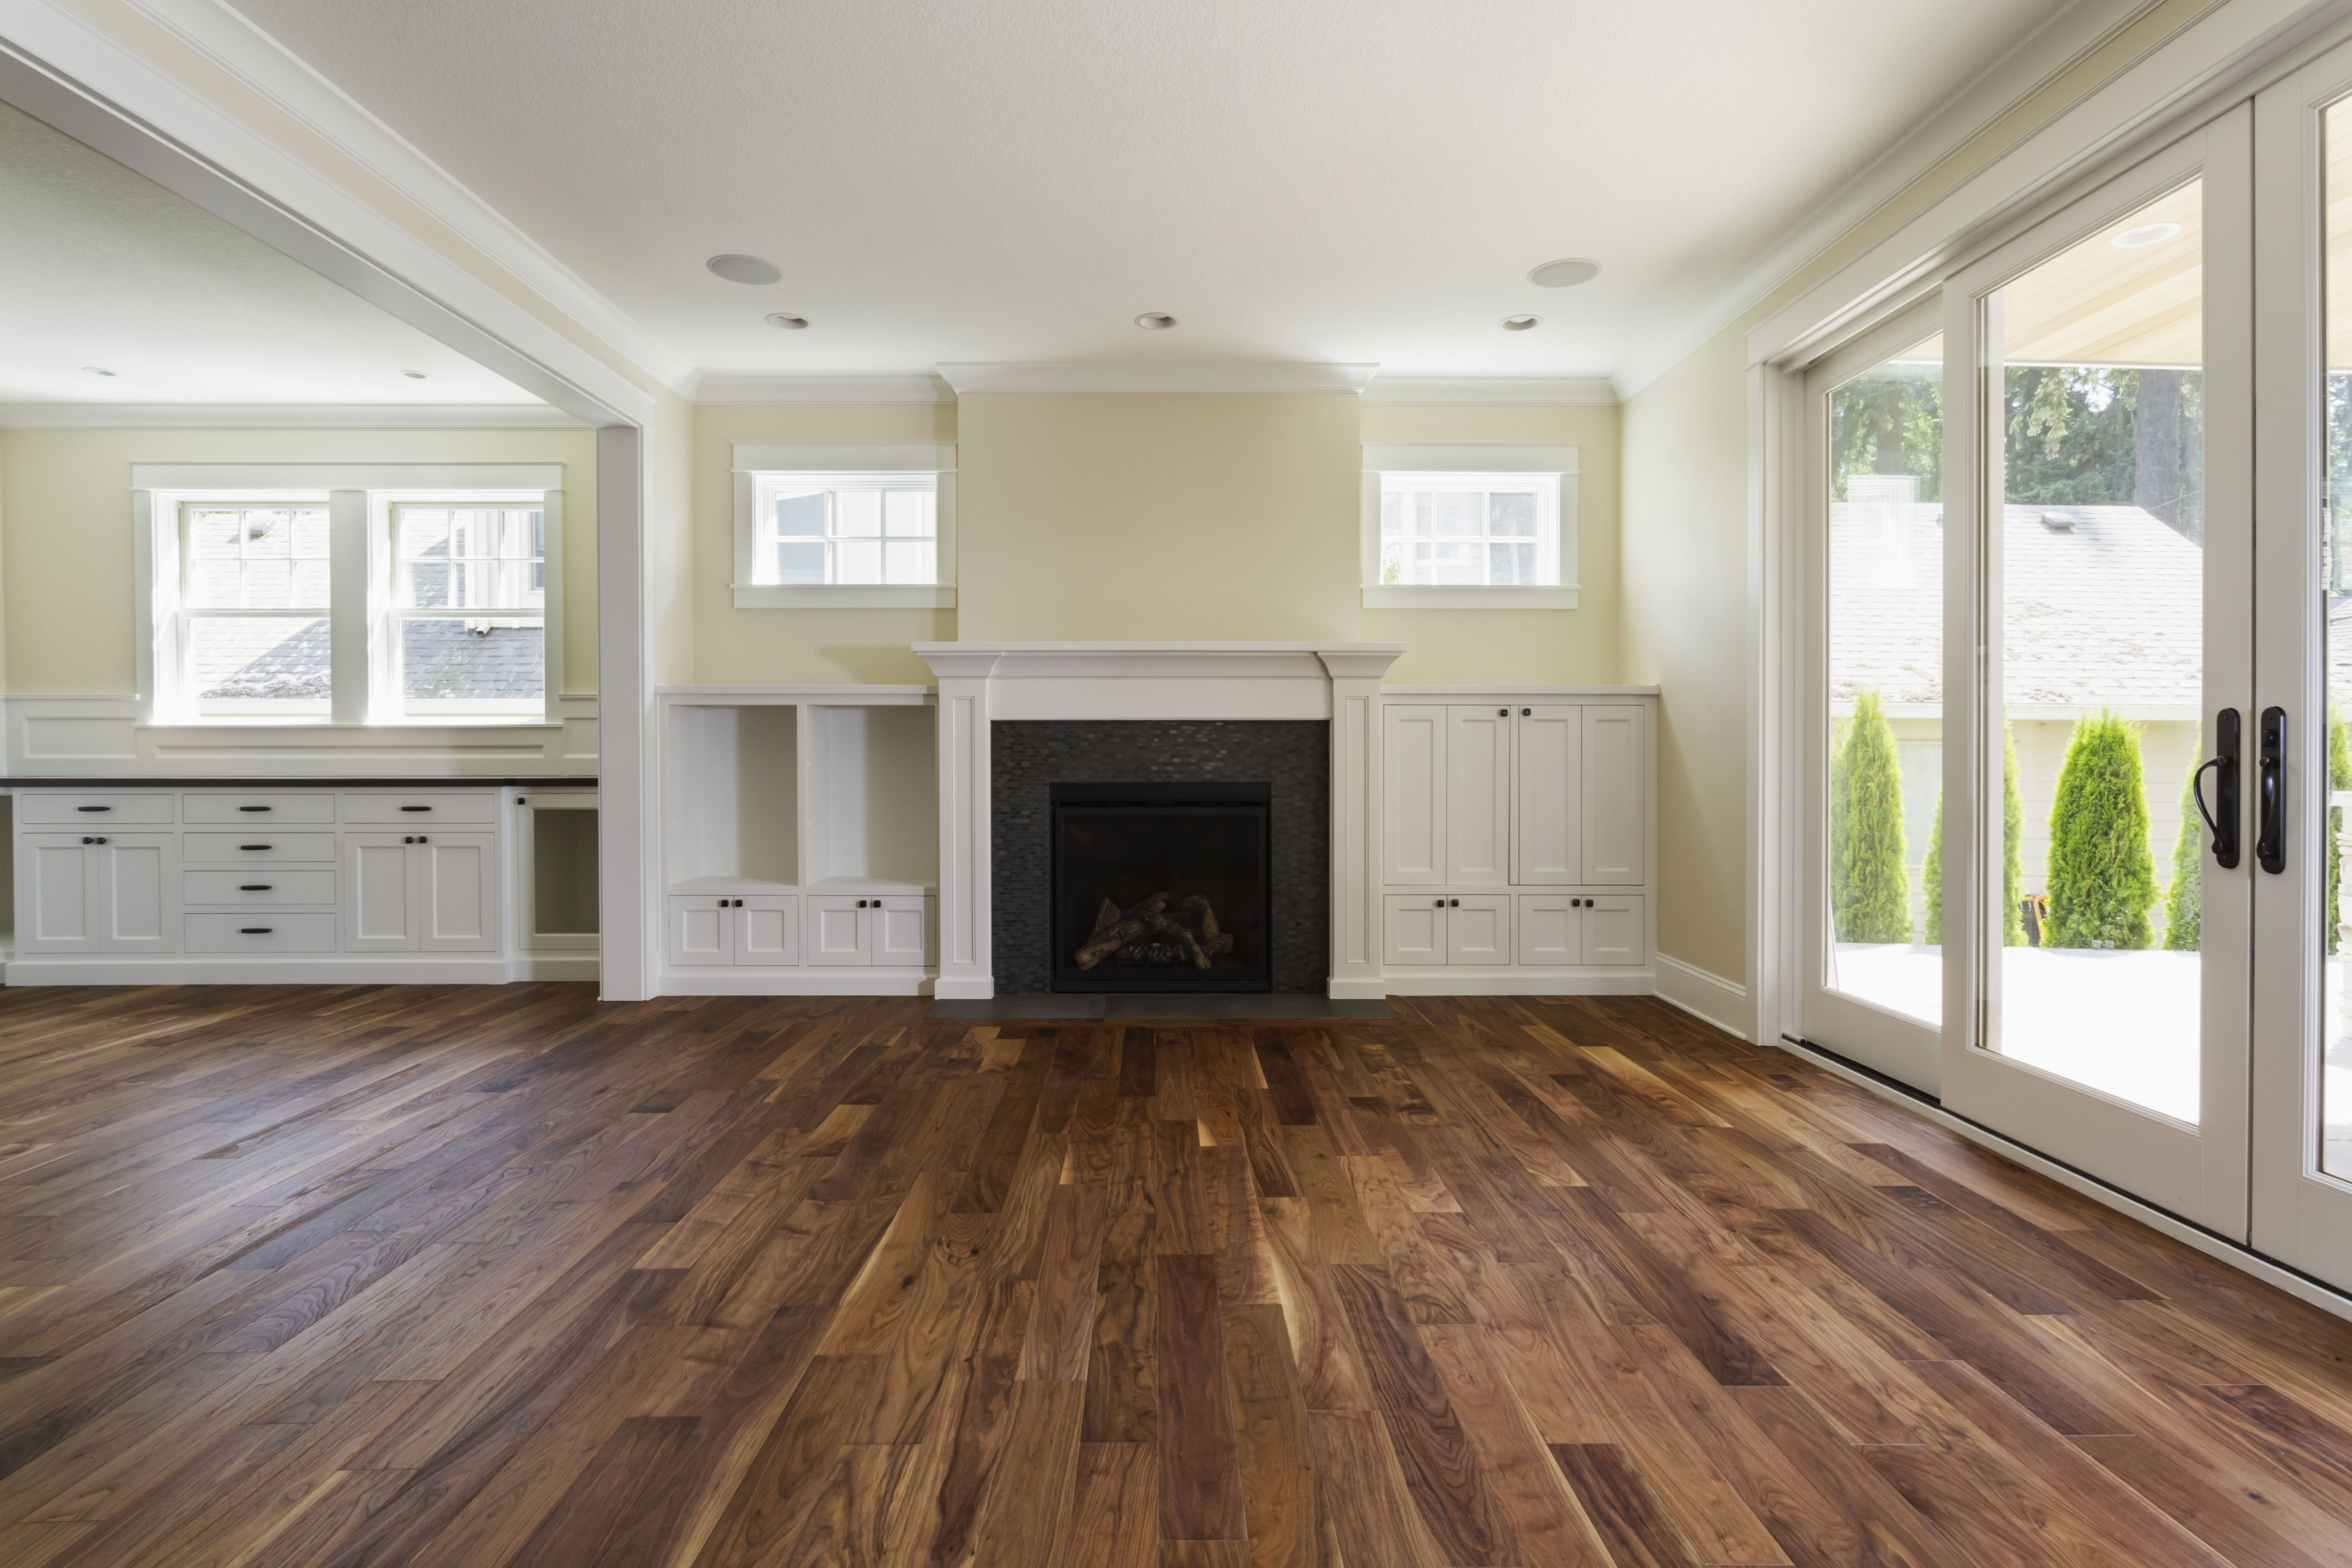 Hardwood Floor Stain Colors Popular Of The Pros And Cons Of Prefinished Hardwood Flooring Intended For Fireplace And Built In Shelves In Living Room 482143011 57bef8e33df78cc16e035397 